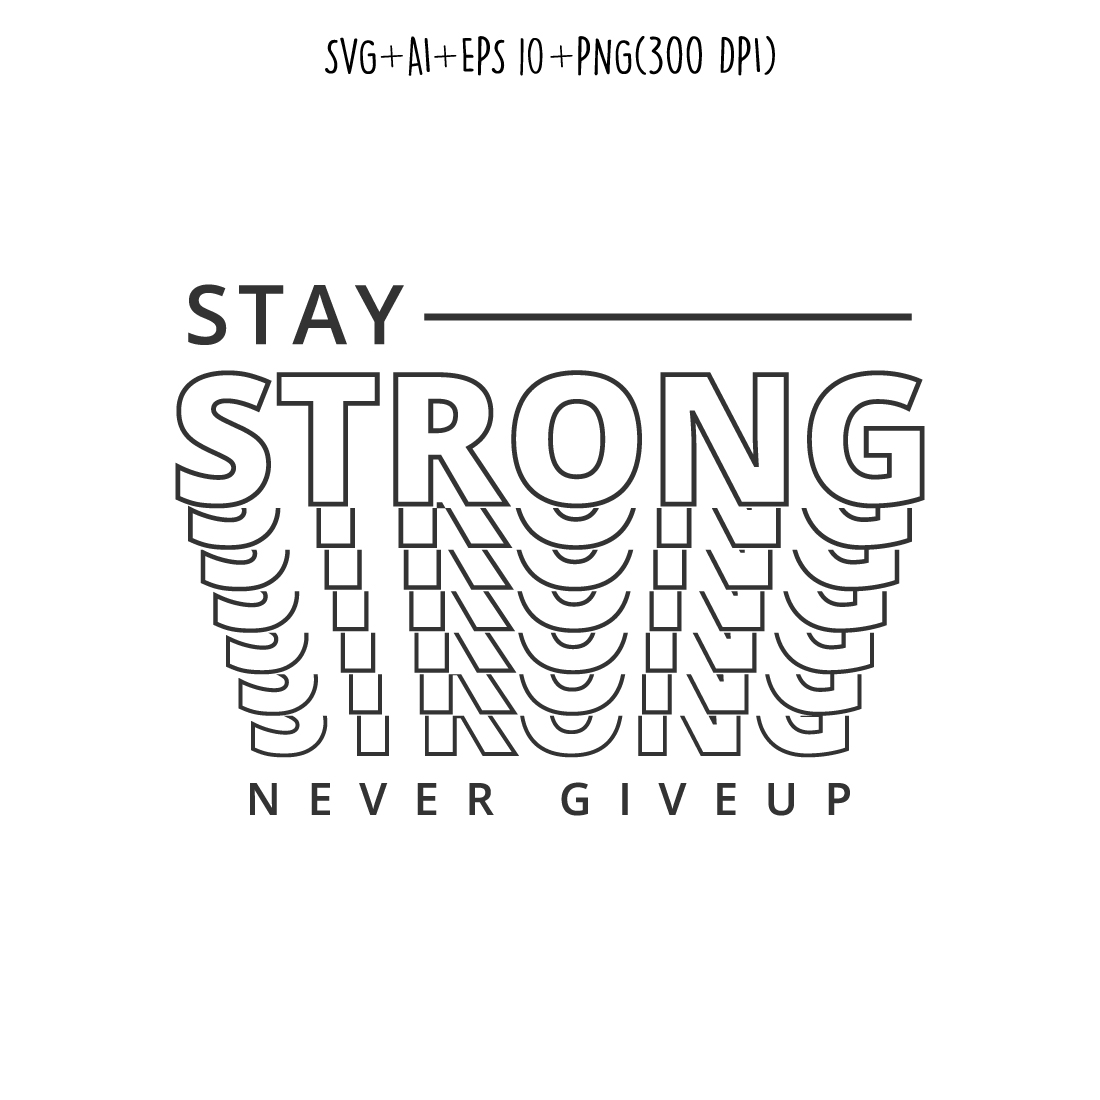 Stay strong never give up motivational quote typography urban style t-shirt design for t-shirts, cards, frame artwork, phone cases, bags, mugs, stickers, tumblers, print, etc preview image.